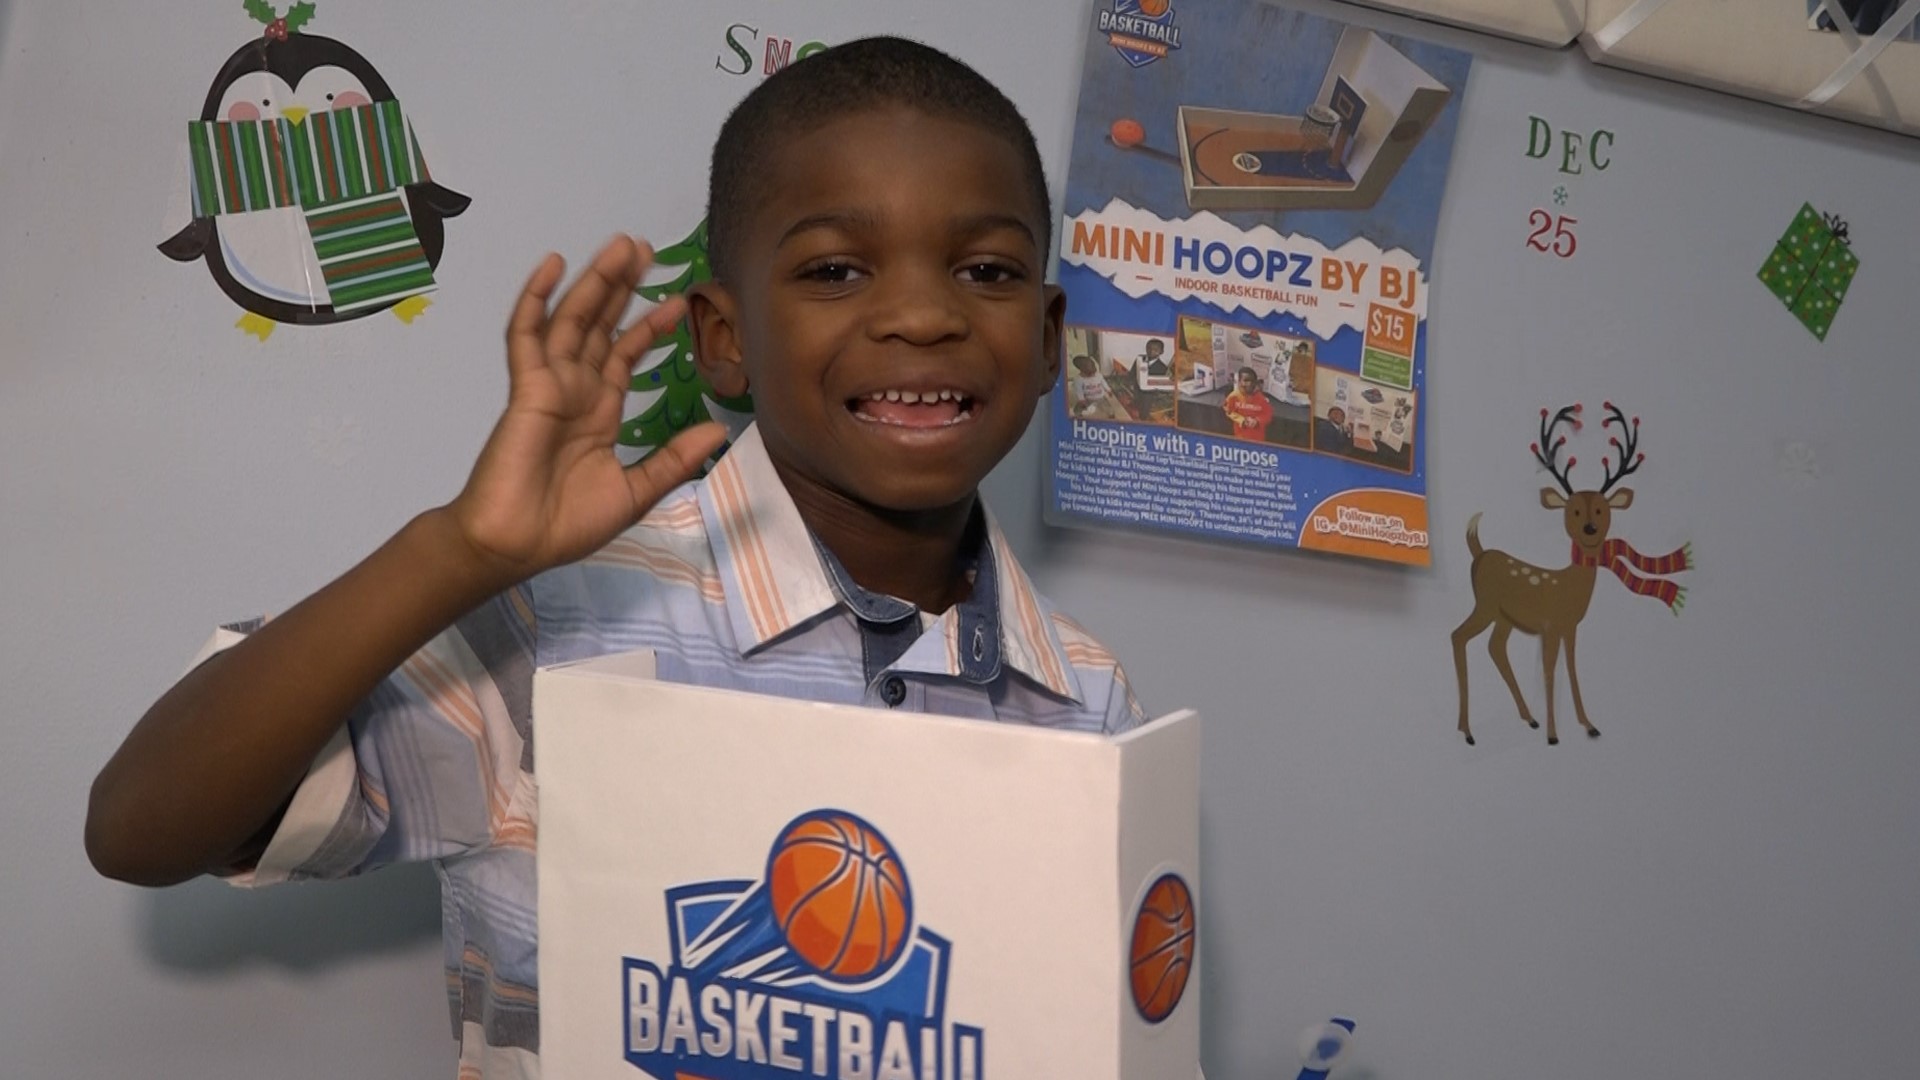 When BJ Thompson's parents told him that he couldn't play his favorite sport, basketball, in the house, this creative 5 year old decided to build one of his own. He calls it 'Mini Hoopz', a custom handmade minature table top game that's fun for kids of all ages.